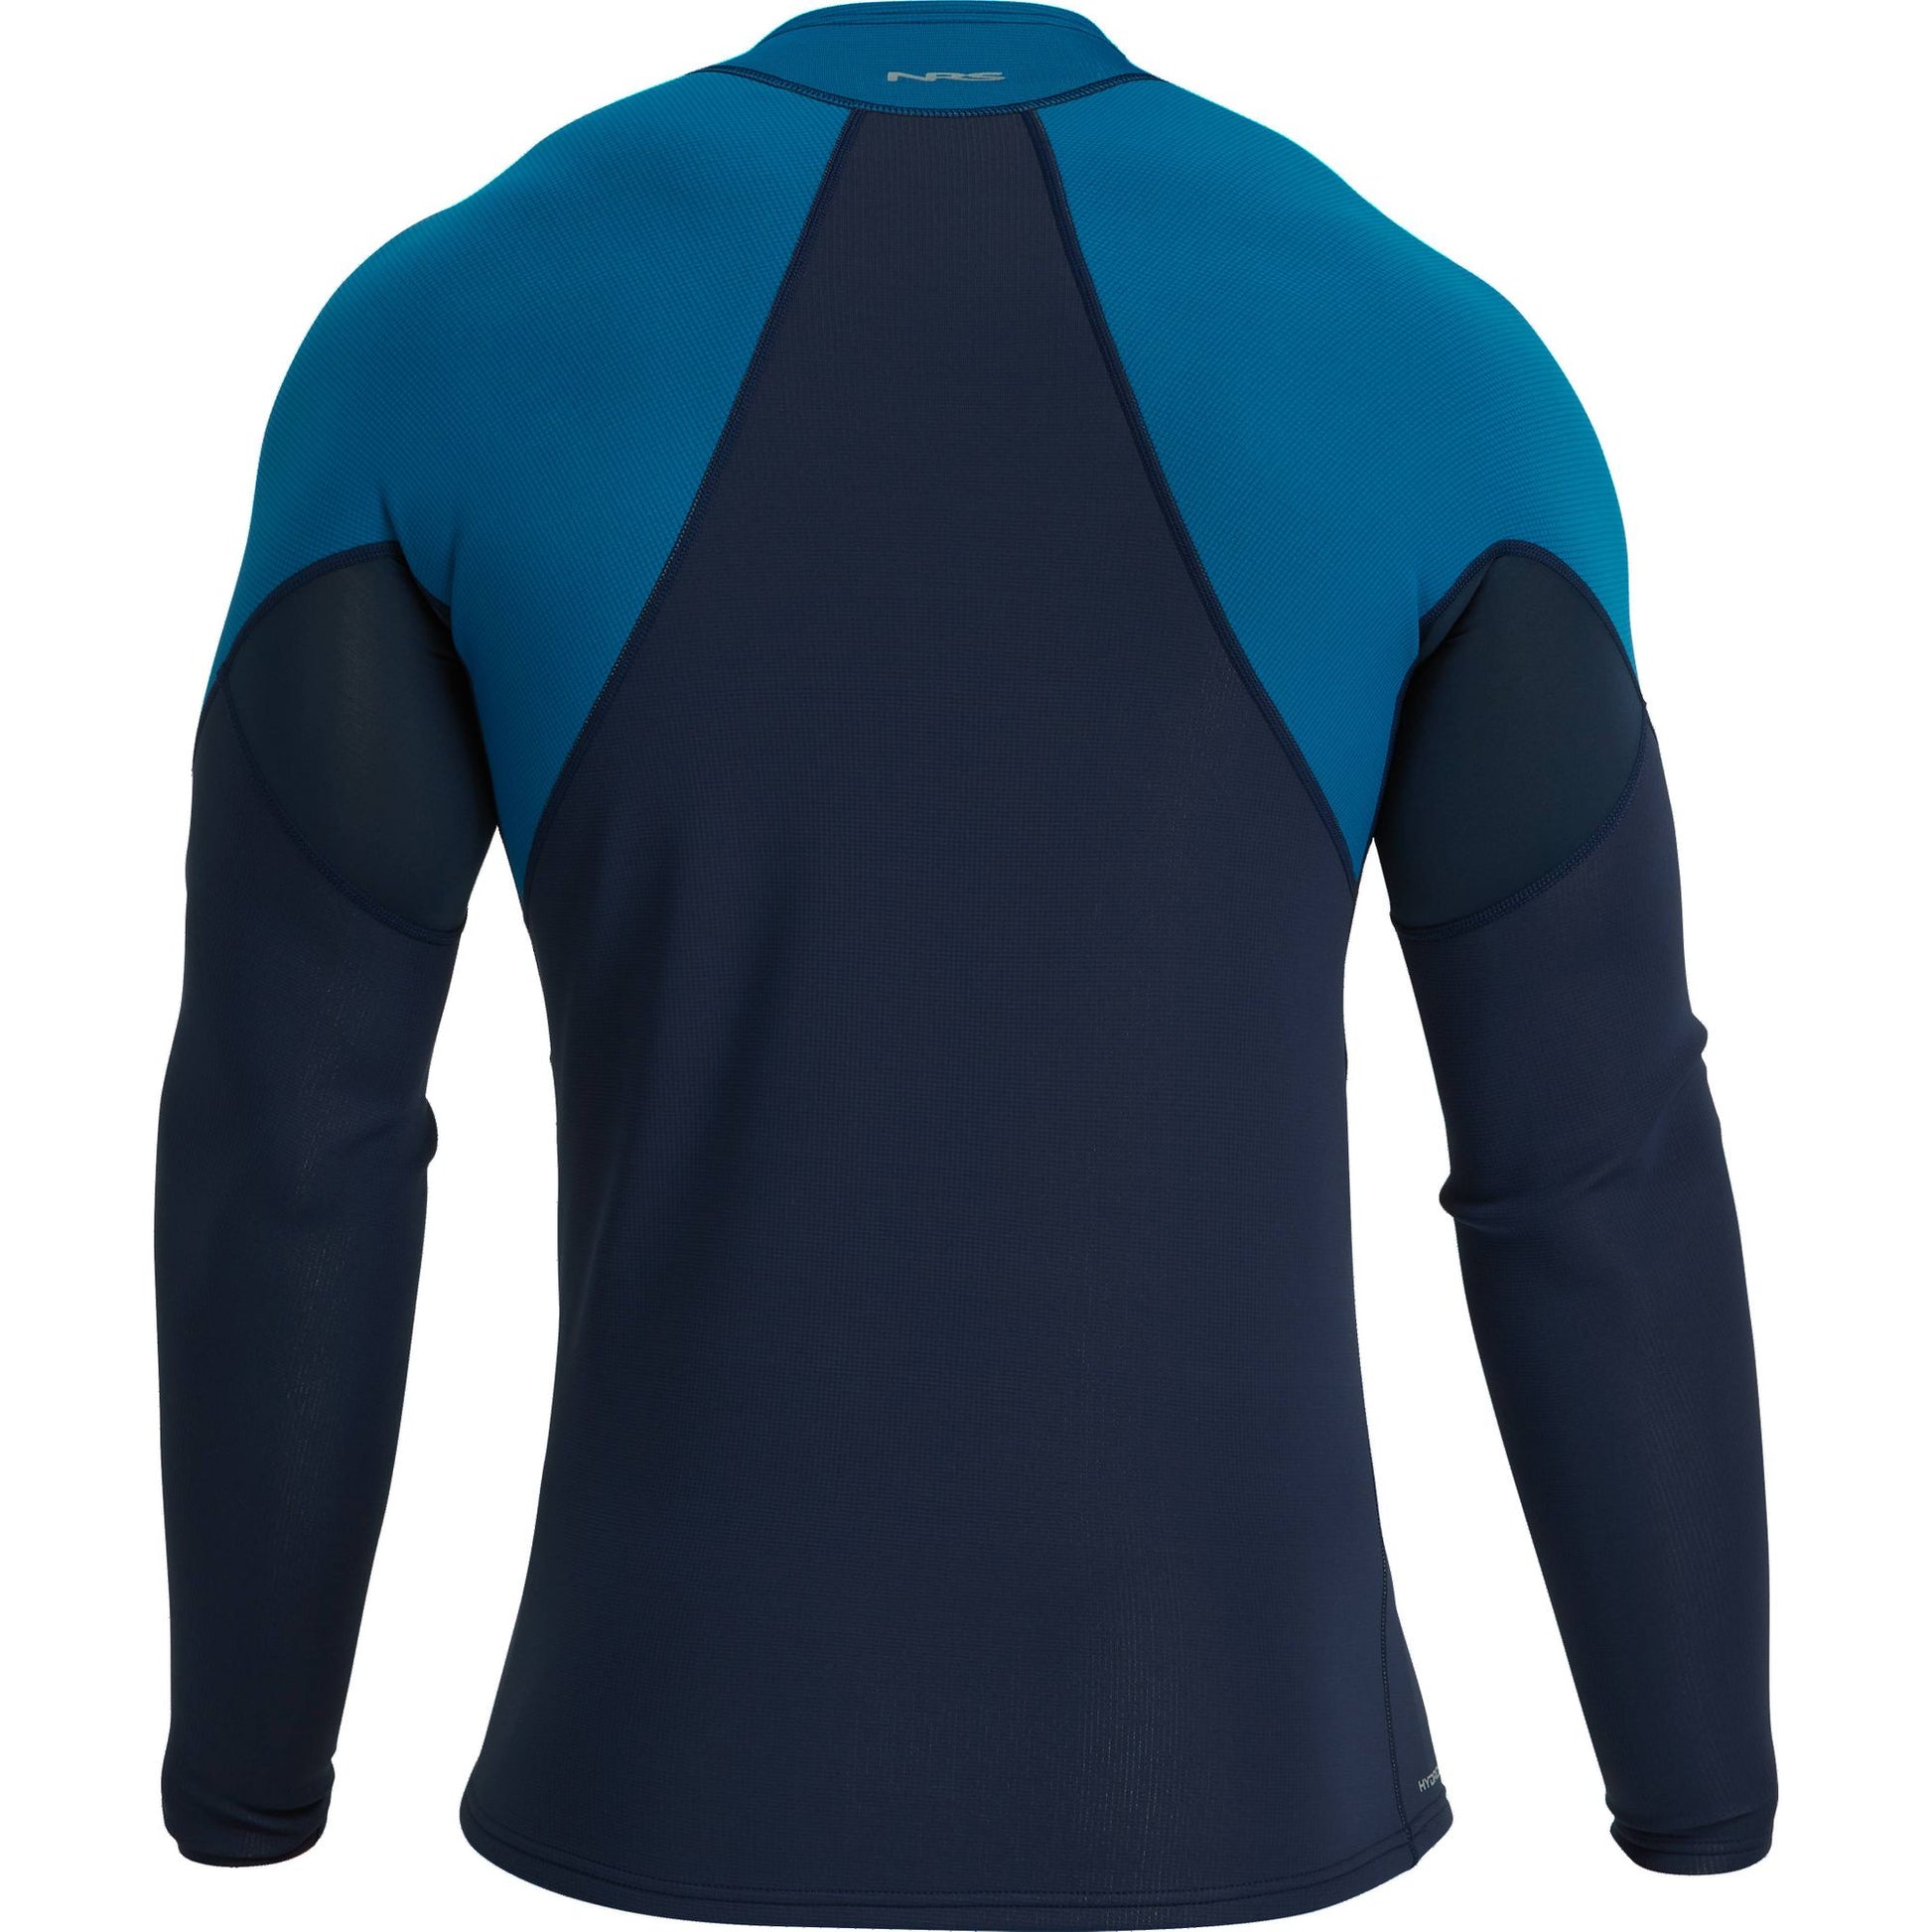 Blue long-sleeved Hydroskin 0.5 Jacket - Men's with contrasting panels and raglan sleeves, designed for paddling performance with a nylon-spandex exterior by NRS.